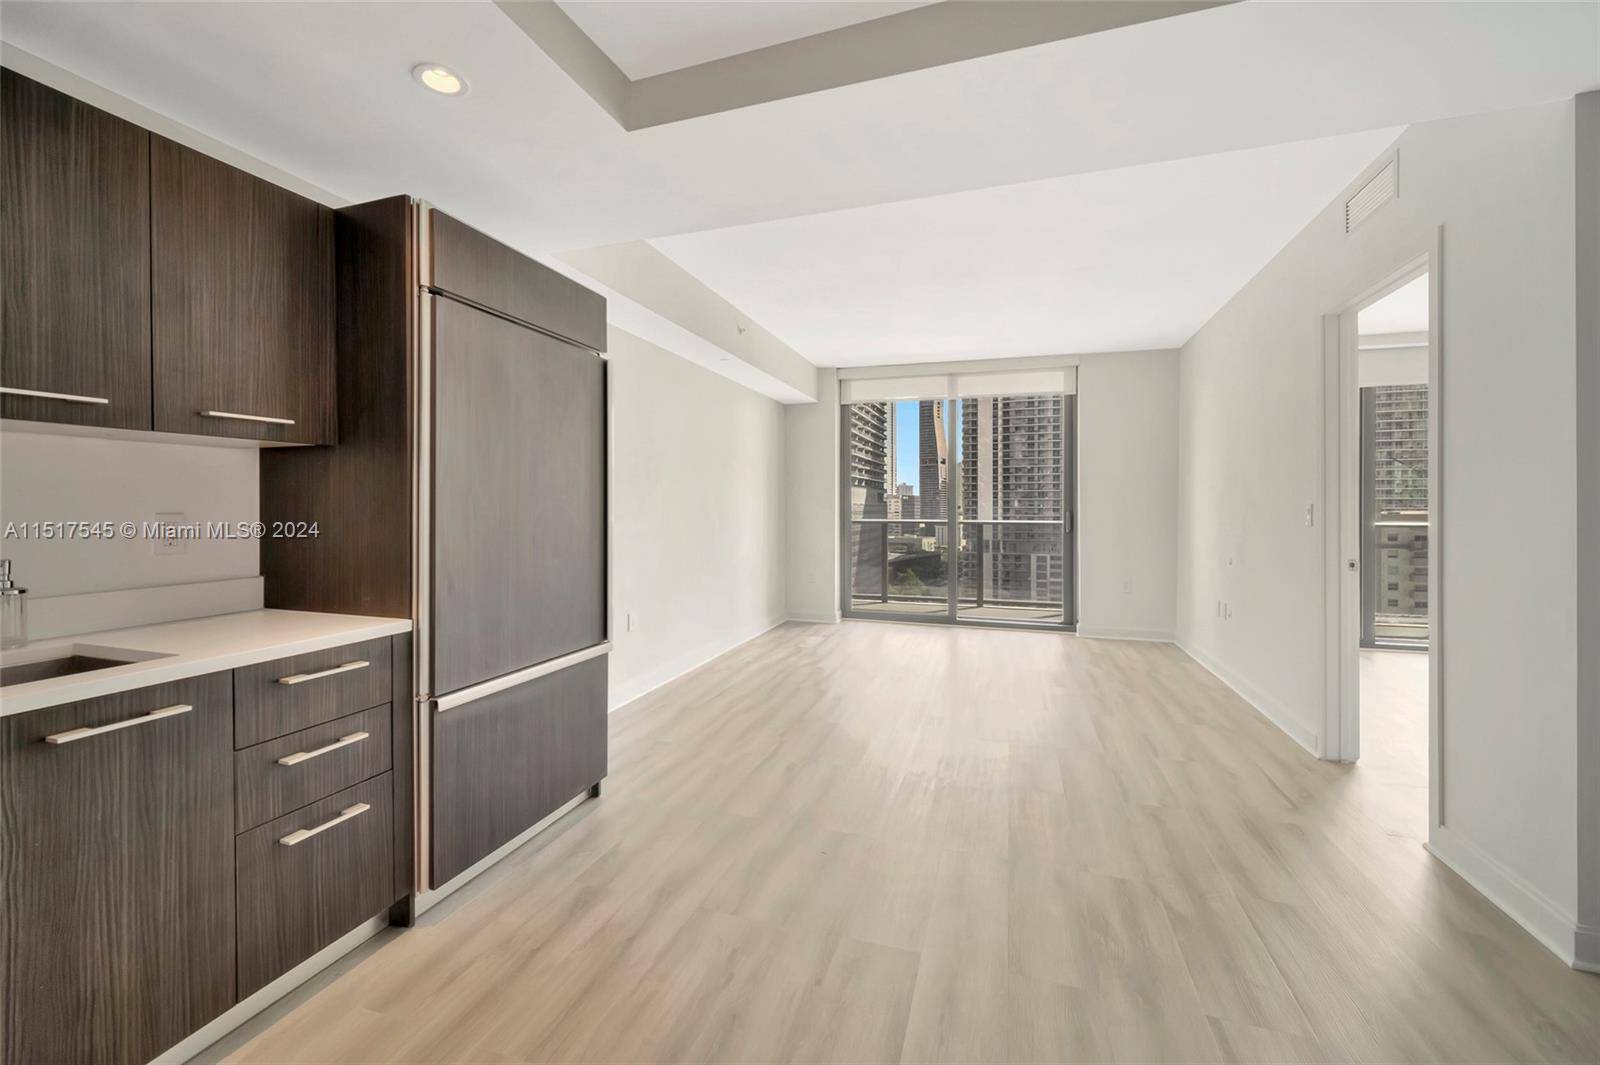 Luxury life in Brickell. This 1 bedroom apartment with 2 full bathrooms plus DEN.